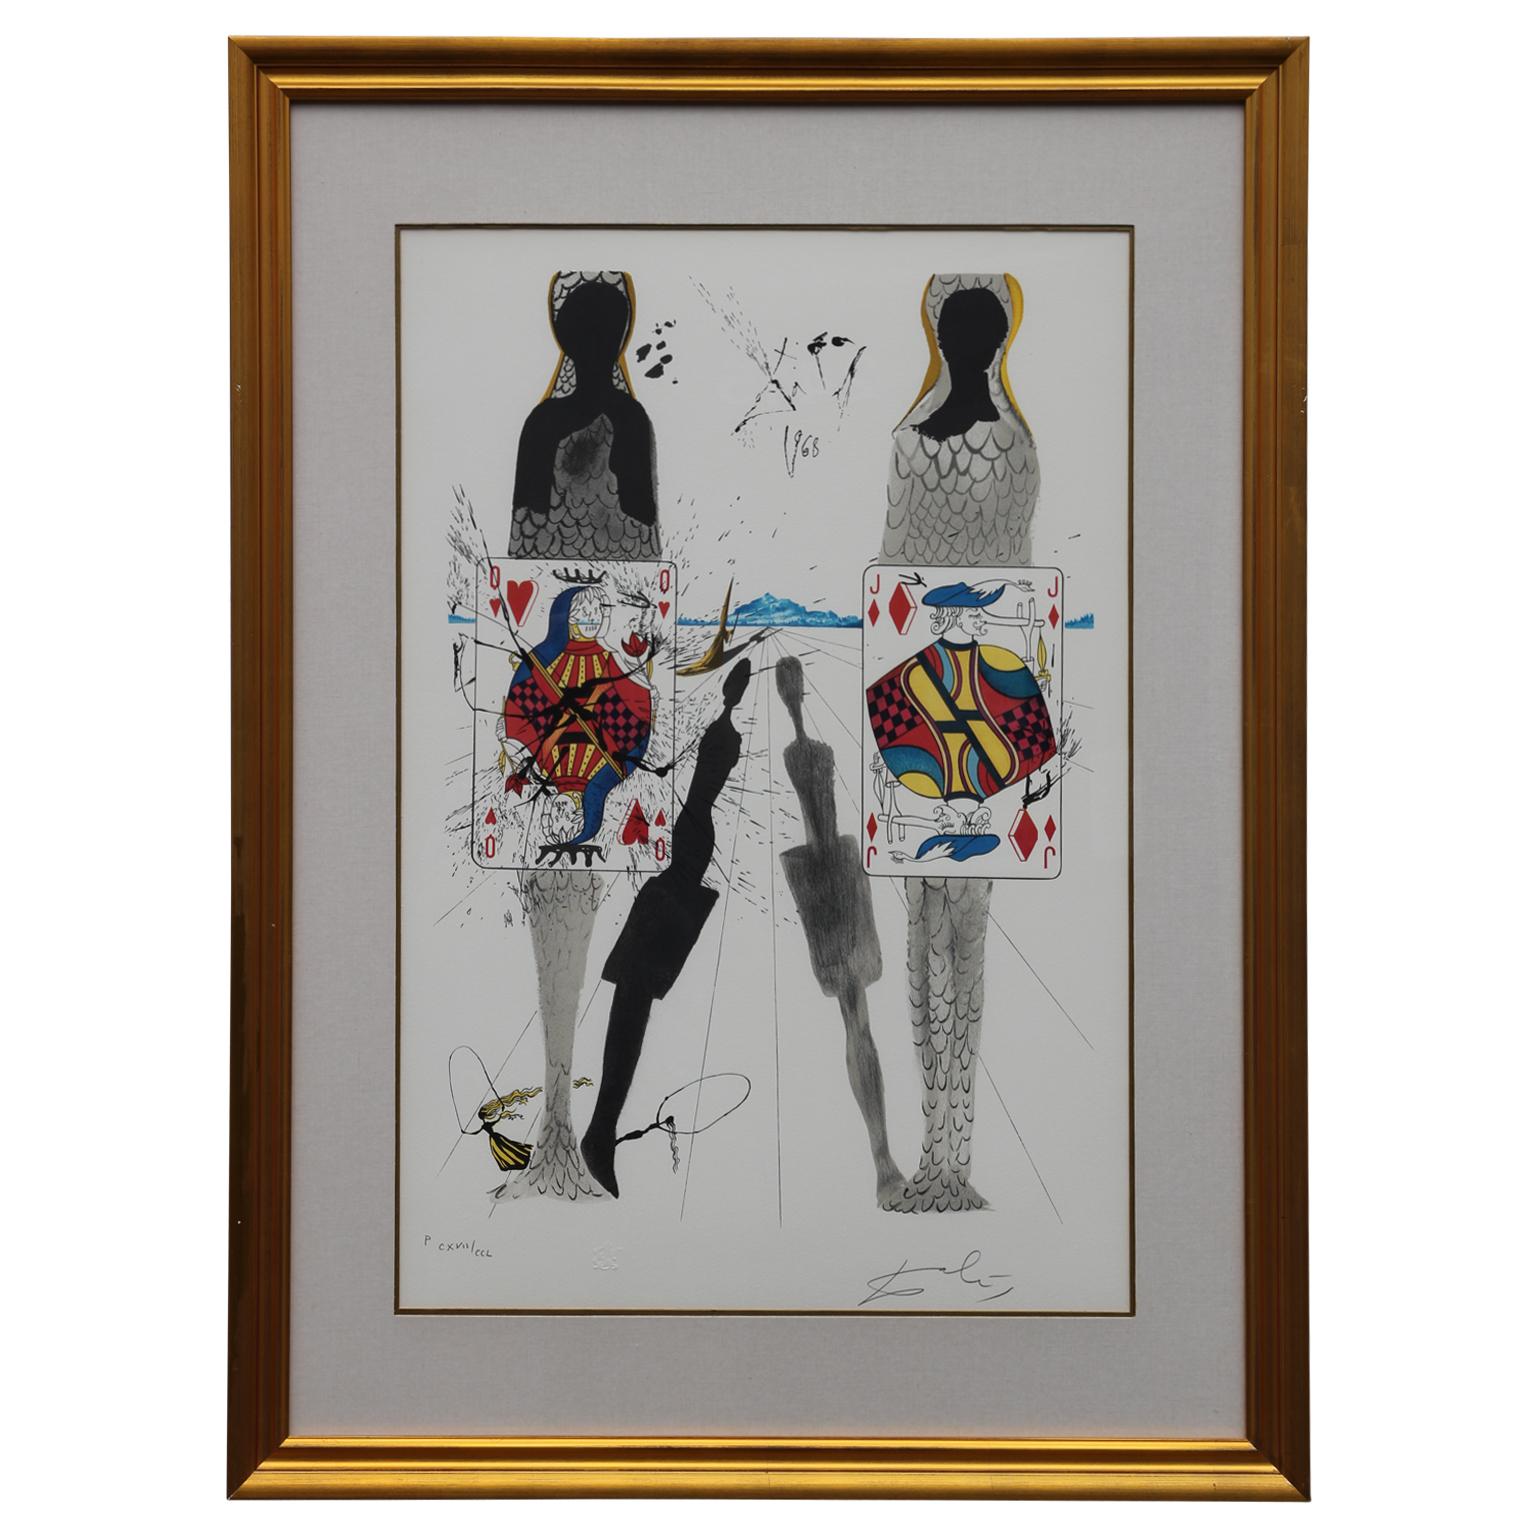 Salvador Dalí Abstract Print - "Alice in Wonderland the Queen’s Croquet Ground" Surrealist Lithograph 